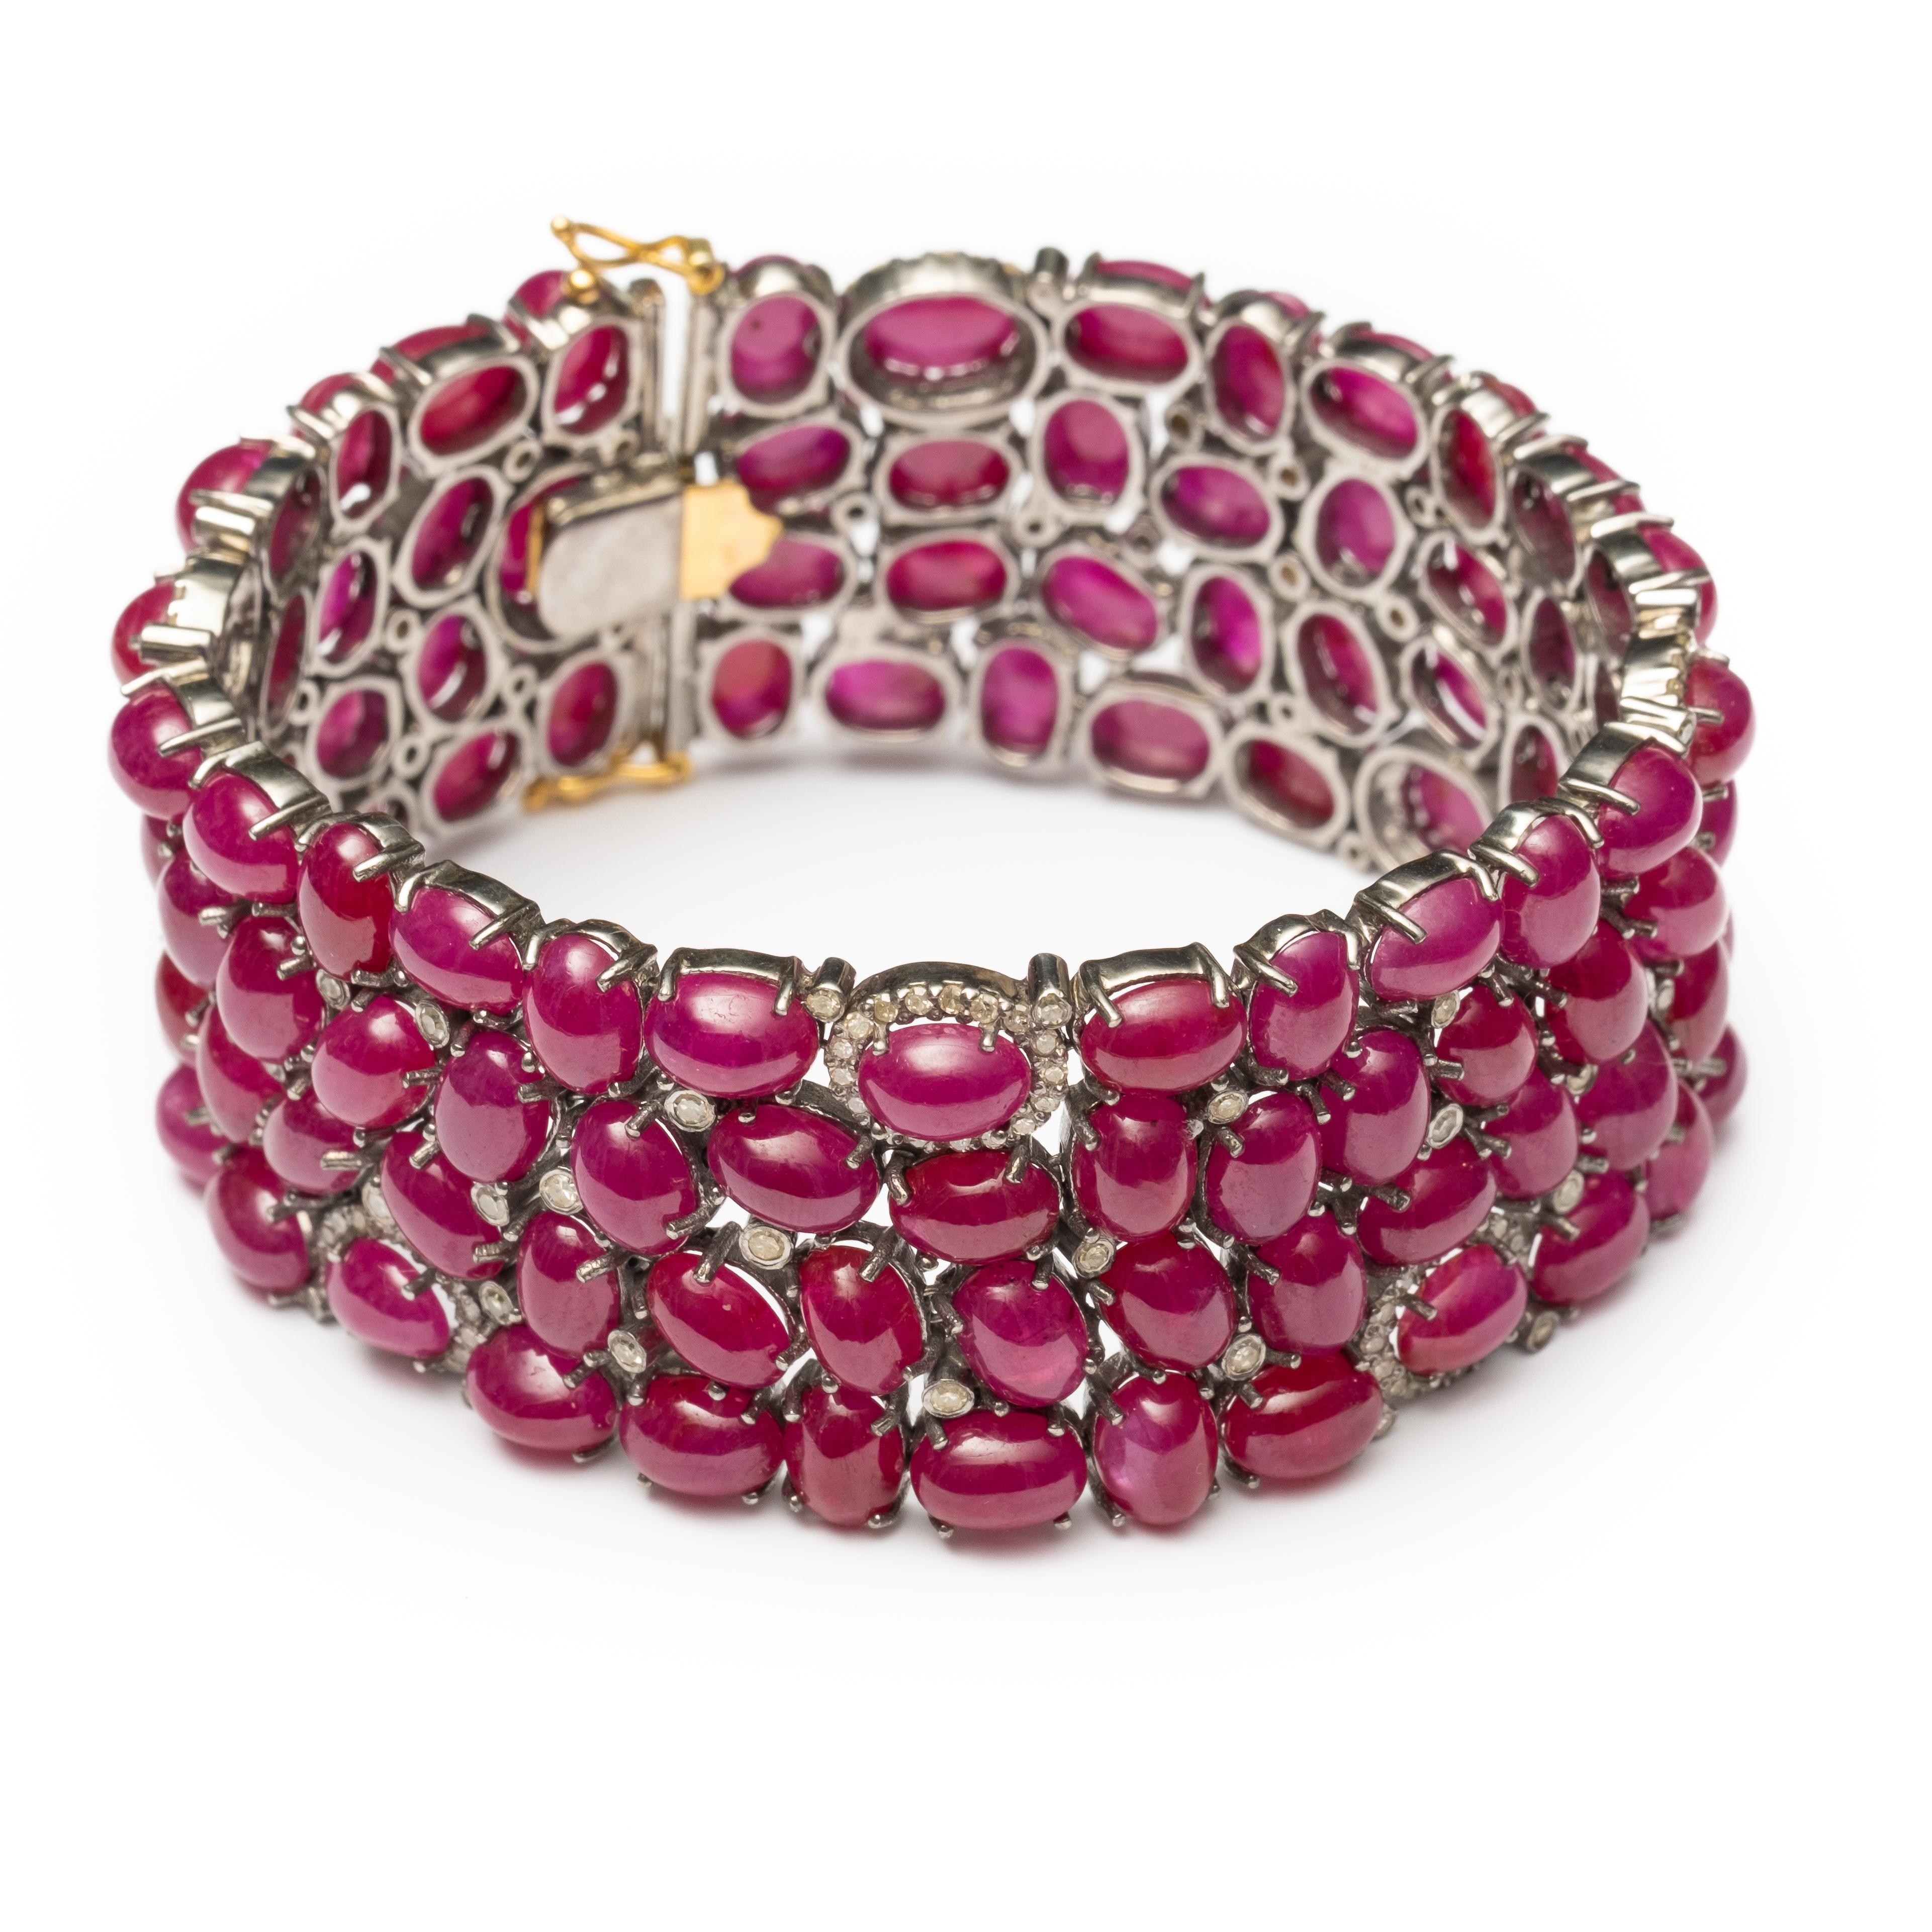 Exceptional Ruby and diamond bracelet with numerous oval cabochon rubies measuring approximately 6.30 x 4.50 mm and numerous single cut diamonds weighing approximately 2.90 carats total. Mounted in silver with gold clasp. 7 inches long. Clasp stamp: